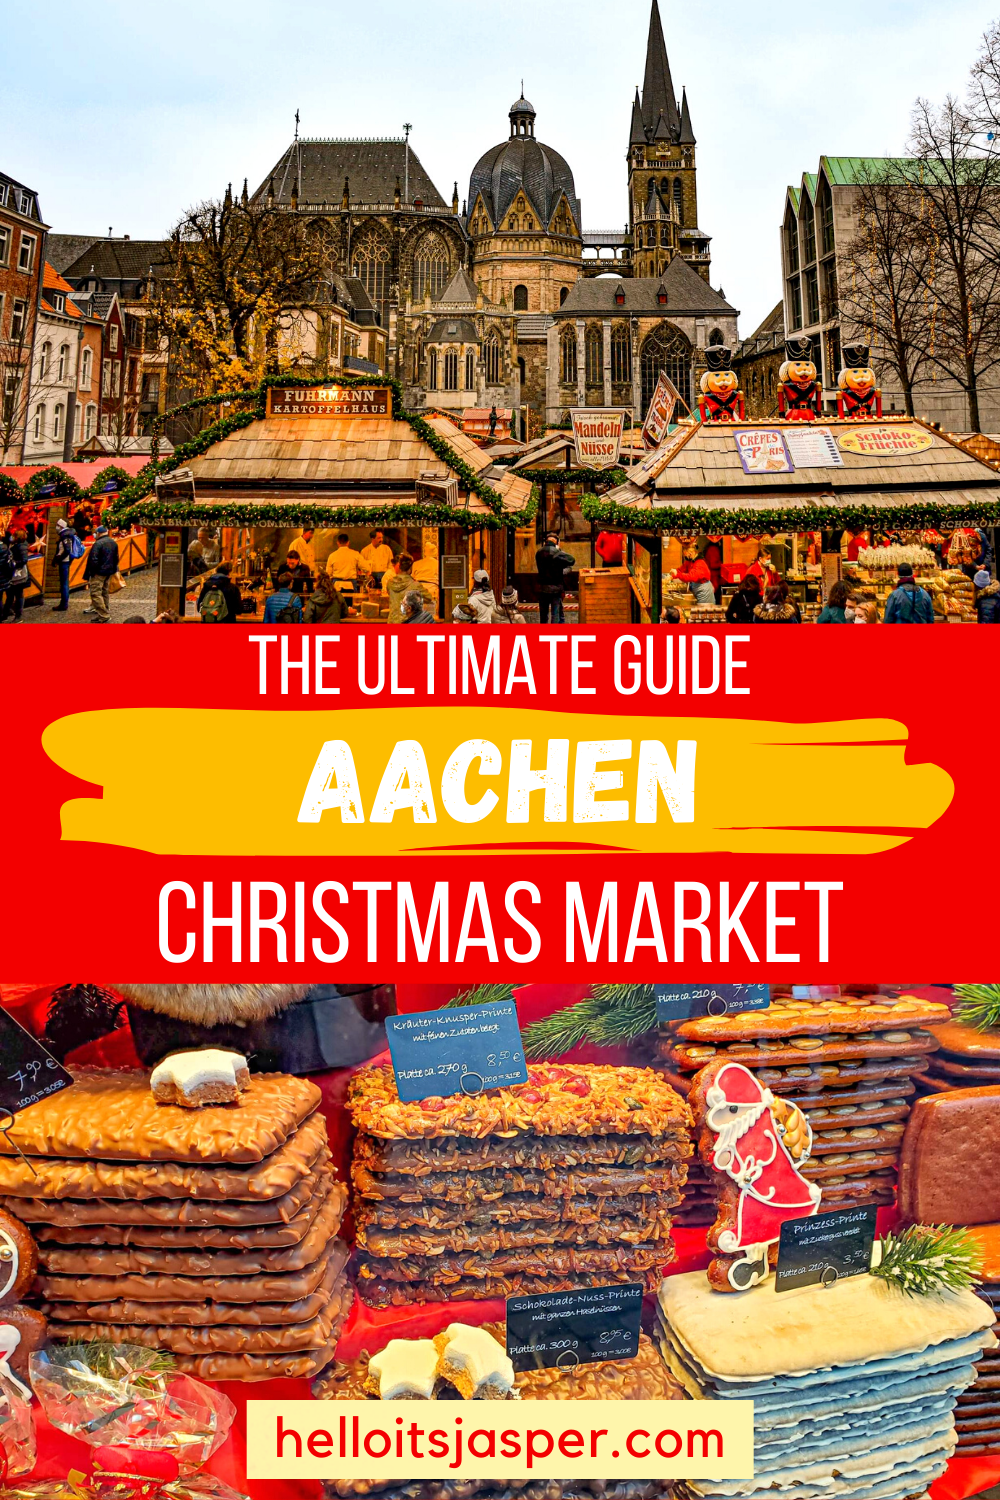 Your Ultimate Guide to the Aachen Christmas Market - Aachener Weihnachtsmarkt